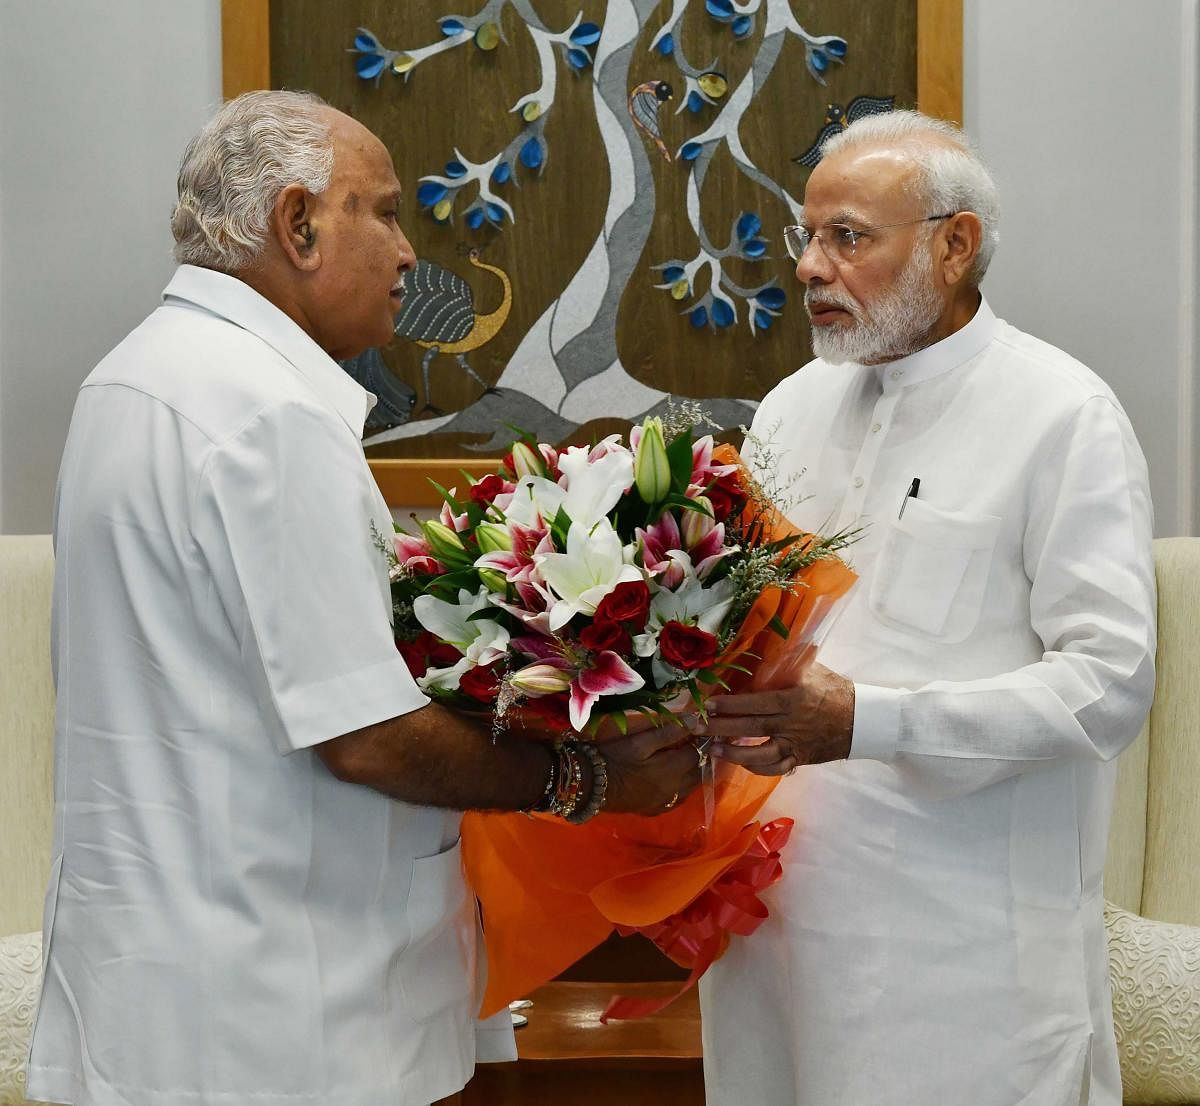  Prime Minister Narendra Modi is presented a bouquet by Karnataka Chief Minister BS Yediyurappa during a meeting. (PTI Photo)